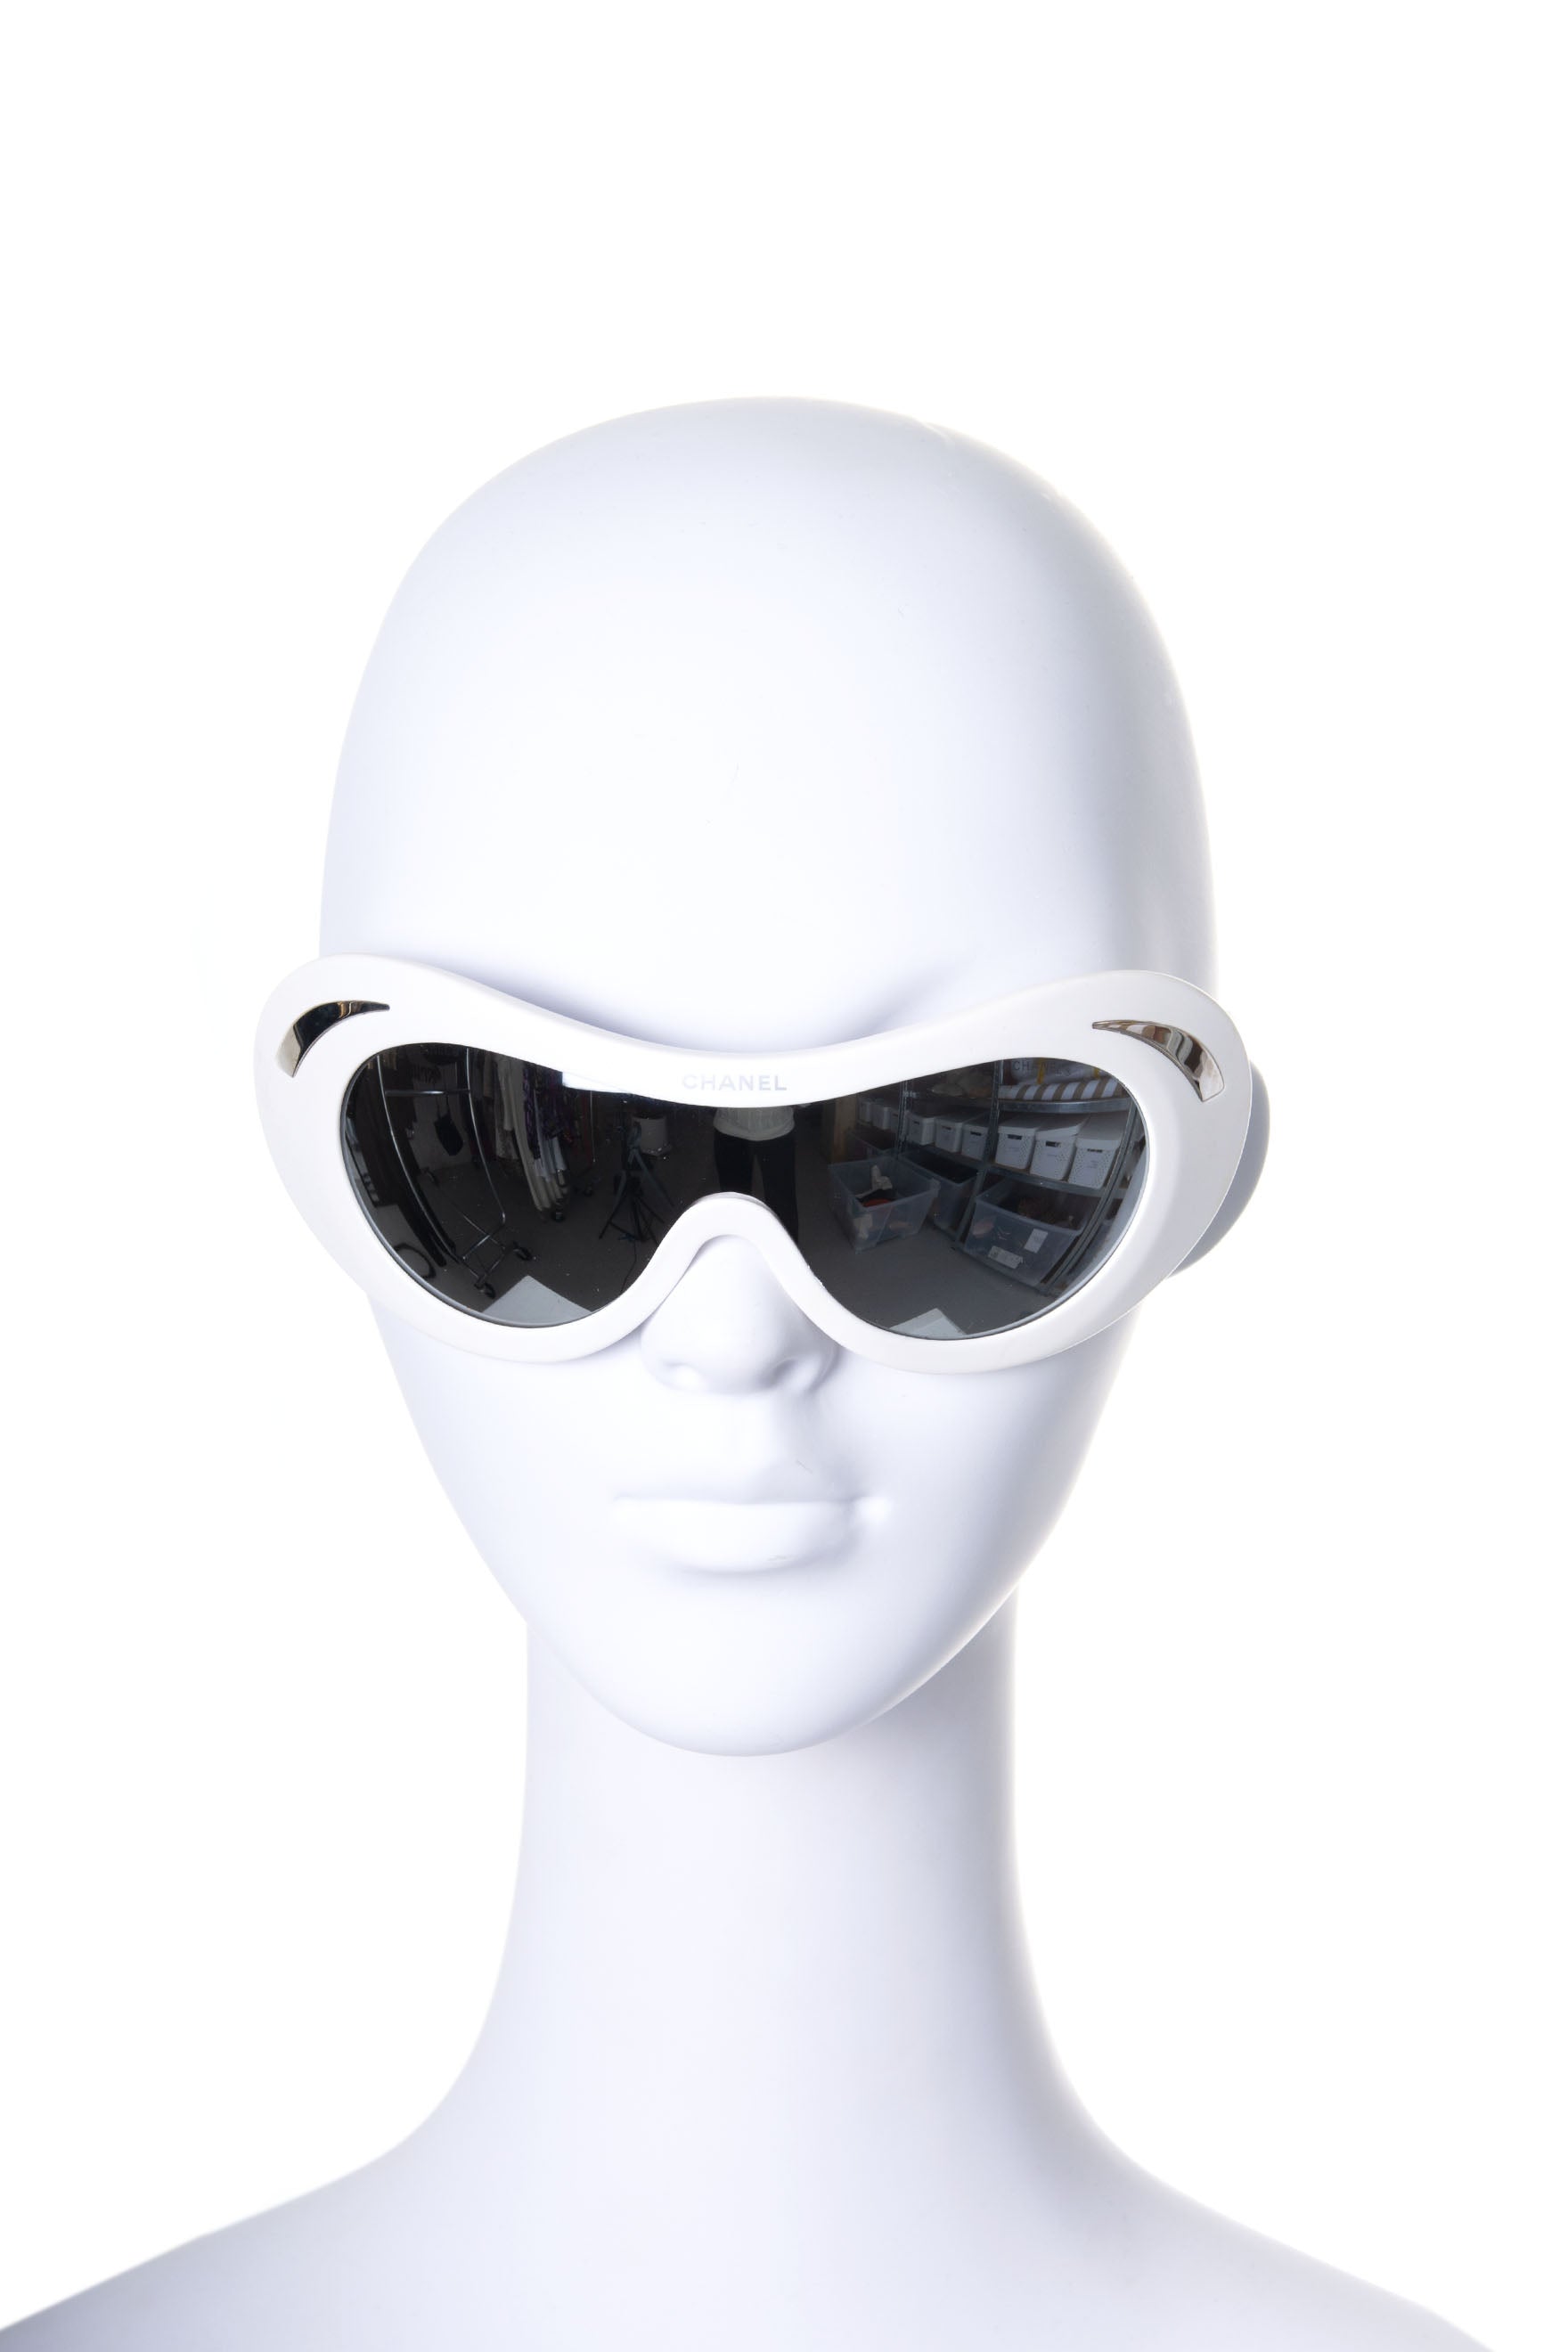 Chanel Multicolour Sunglasses for Sale in Online Auctions